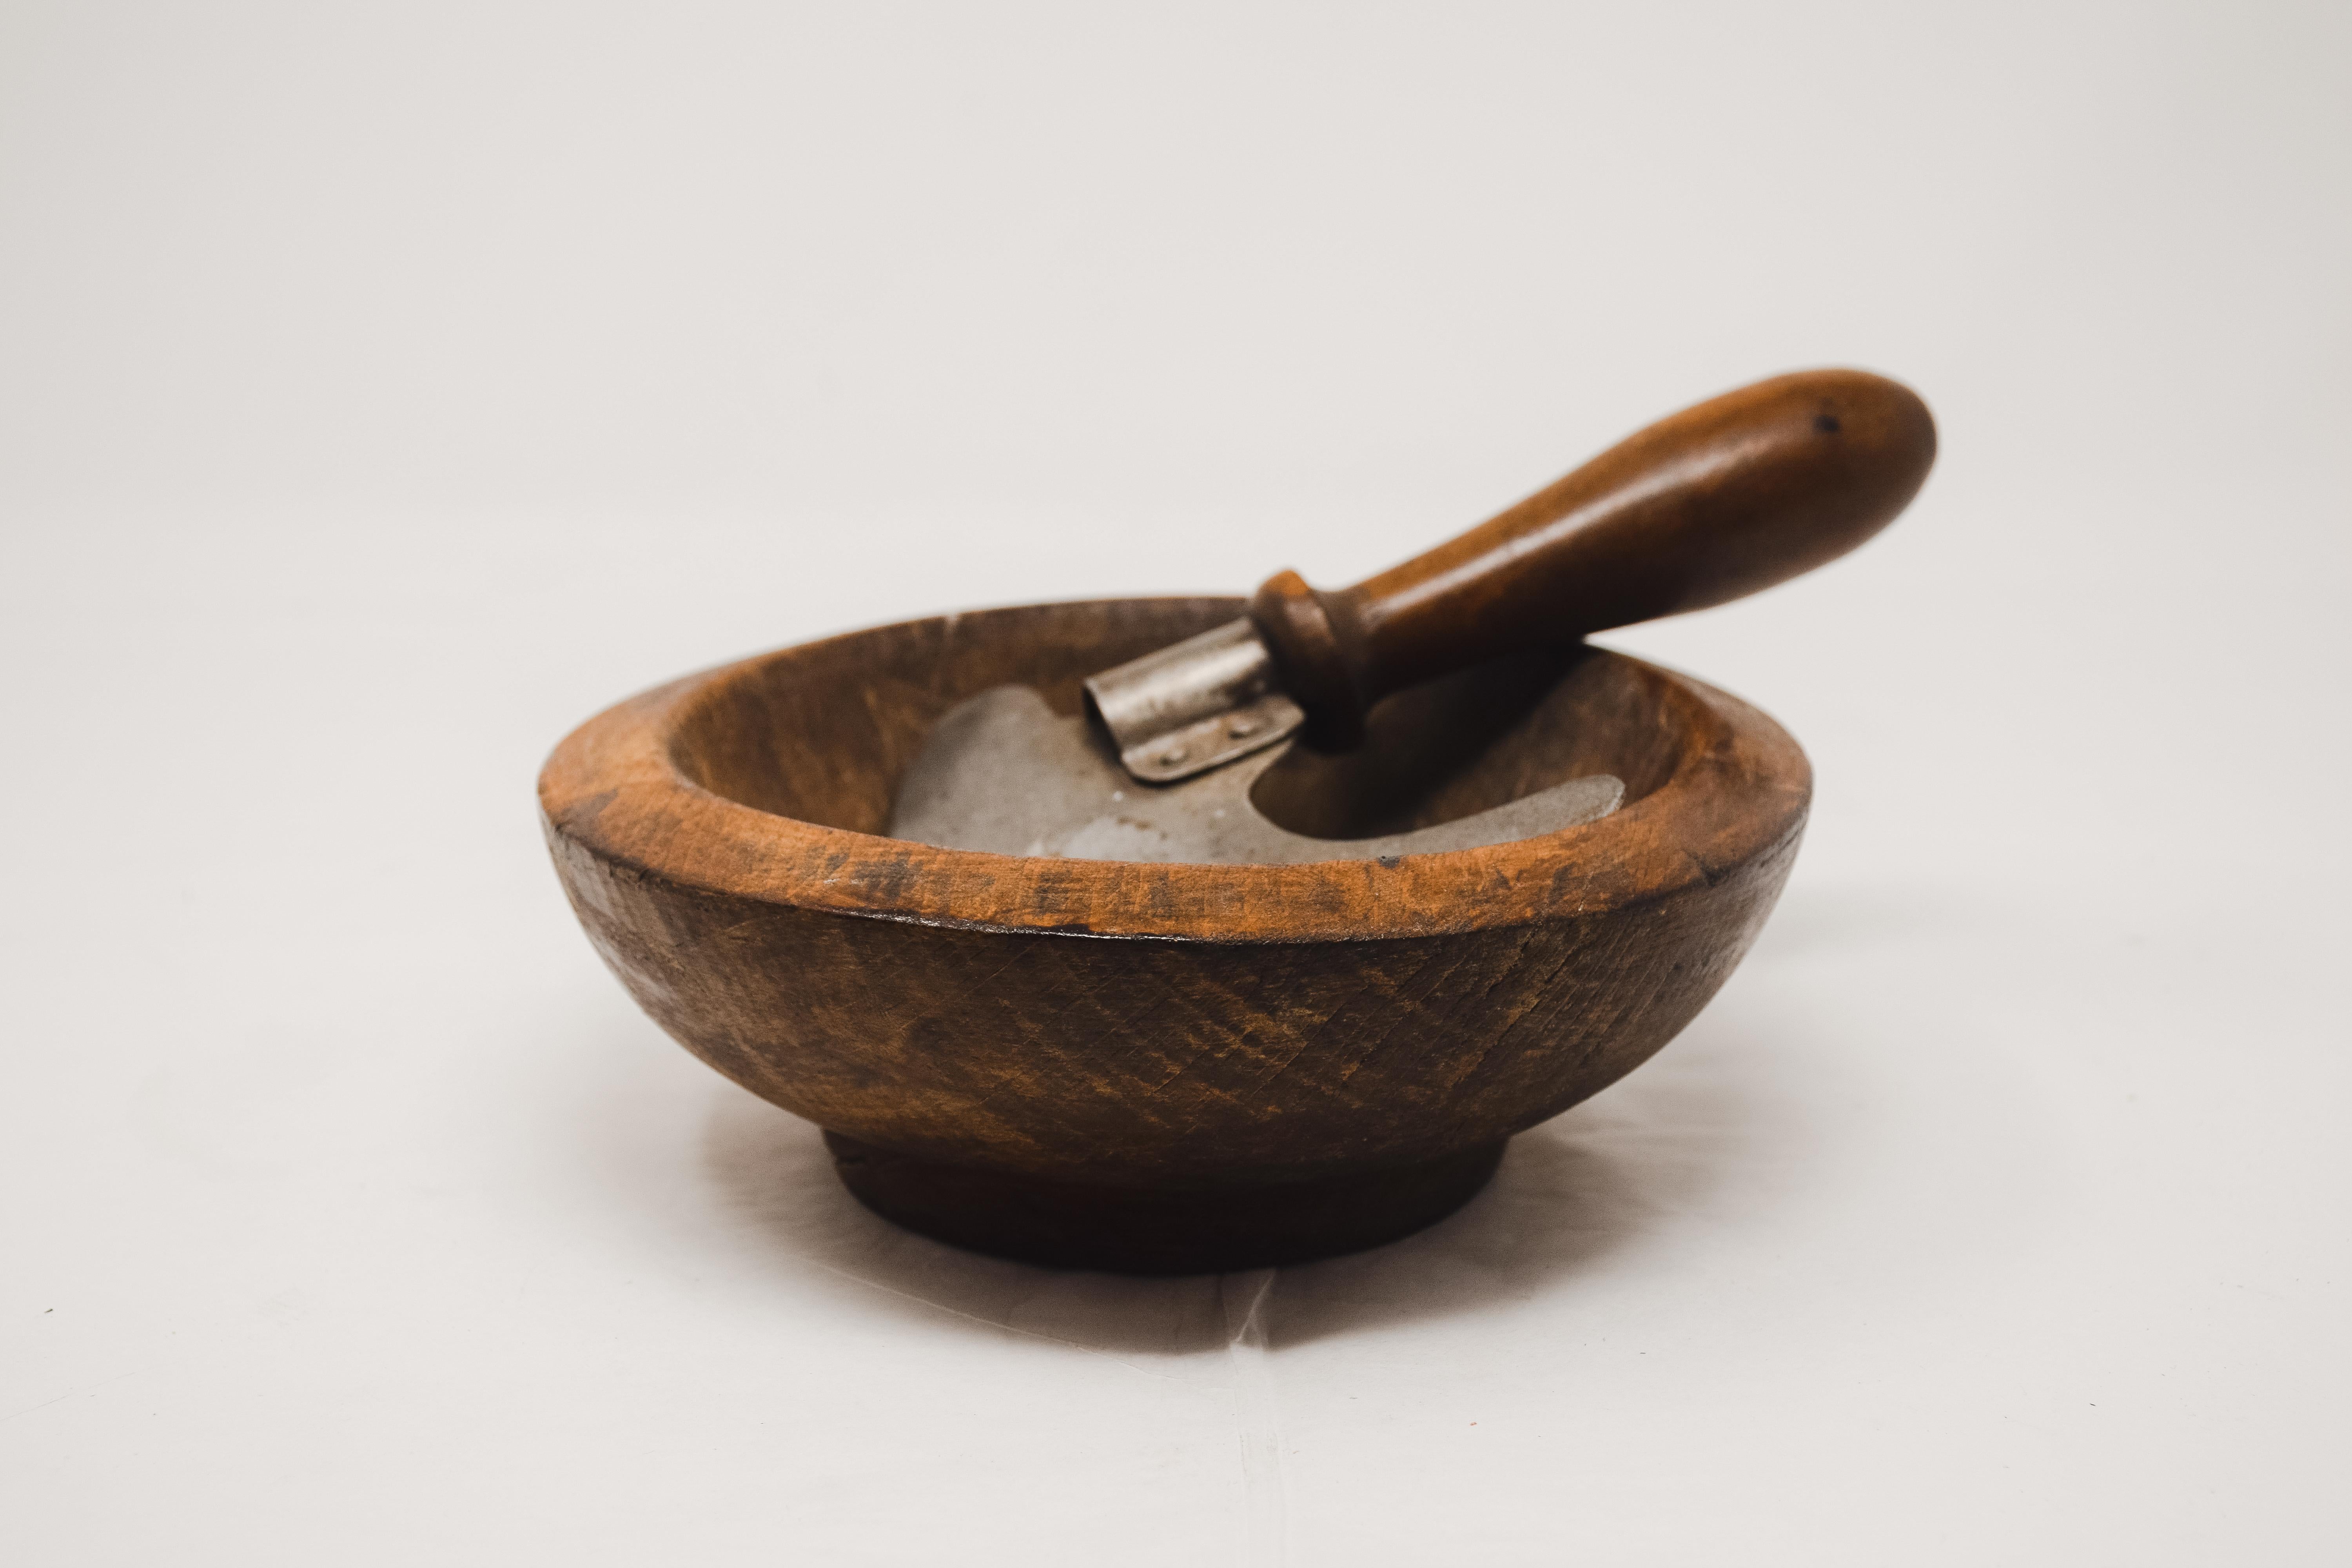 Herb cutter and olive wood bowl from France. The chopper each has an upright wooden handle attached to a crescent shaped steel blade with a wraparound riveted metal strip. The lathe turned bowls have no splits or cracks. The blade has an aged patina